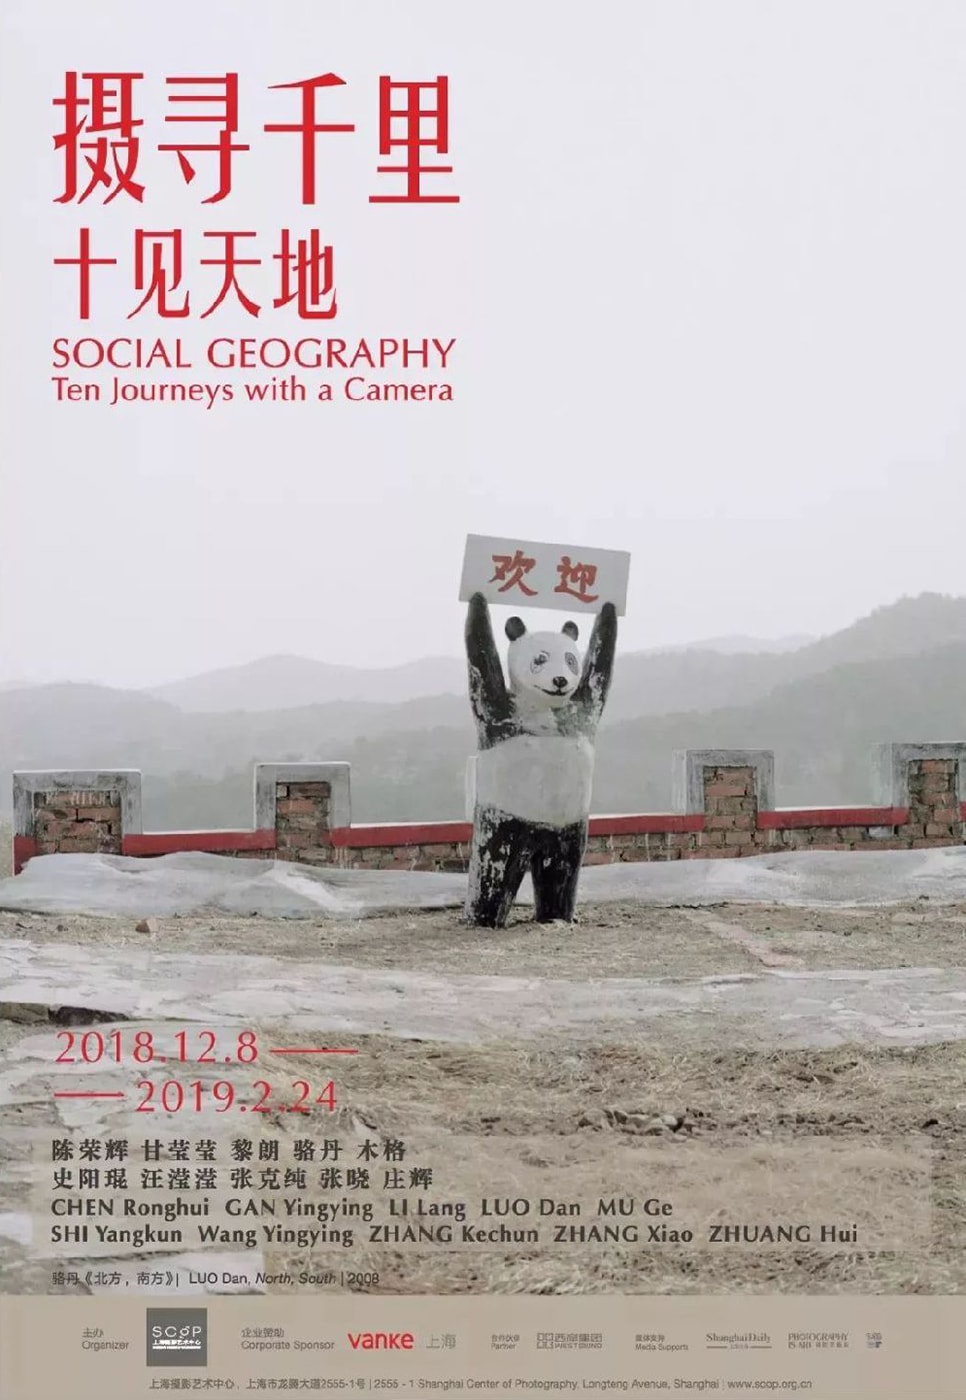 Zhang Xiao participates in “Social Geography: Ten Journeys with a Camera” at Shanghai Center of Photography